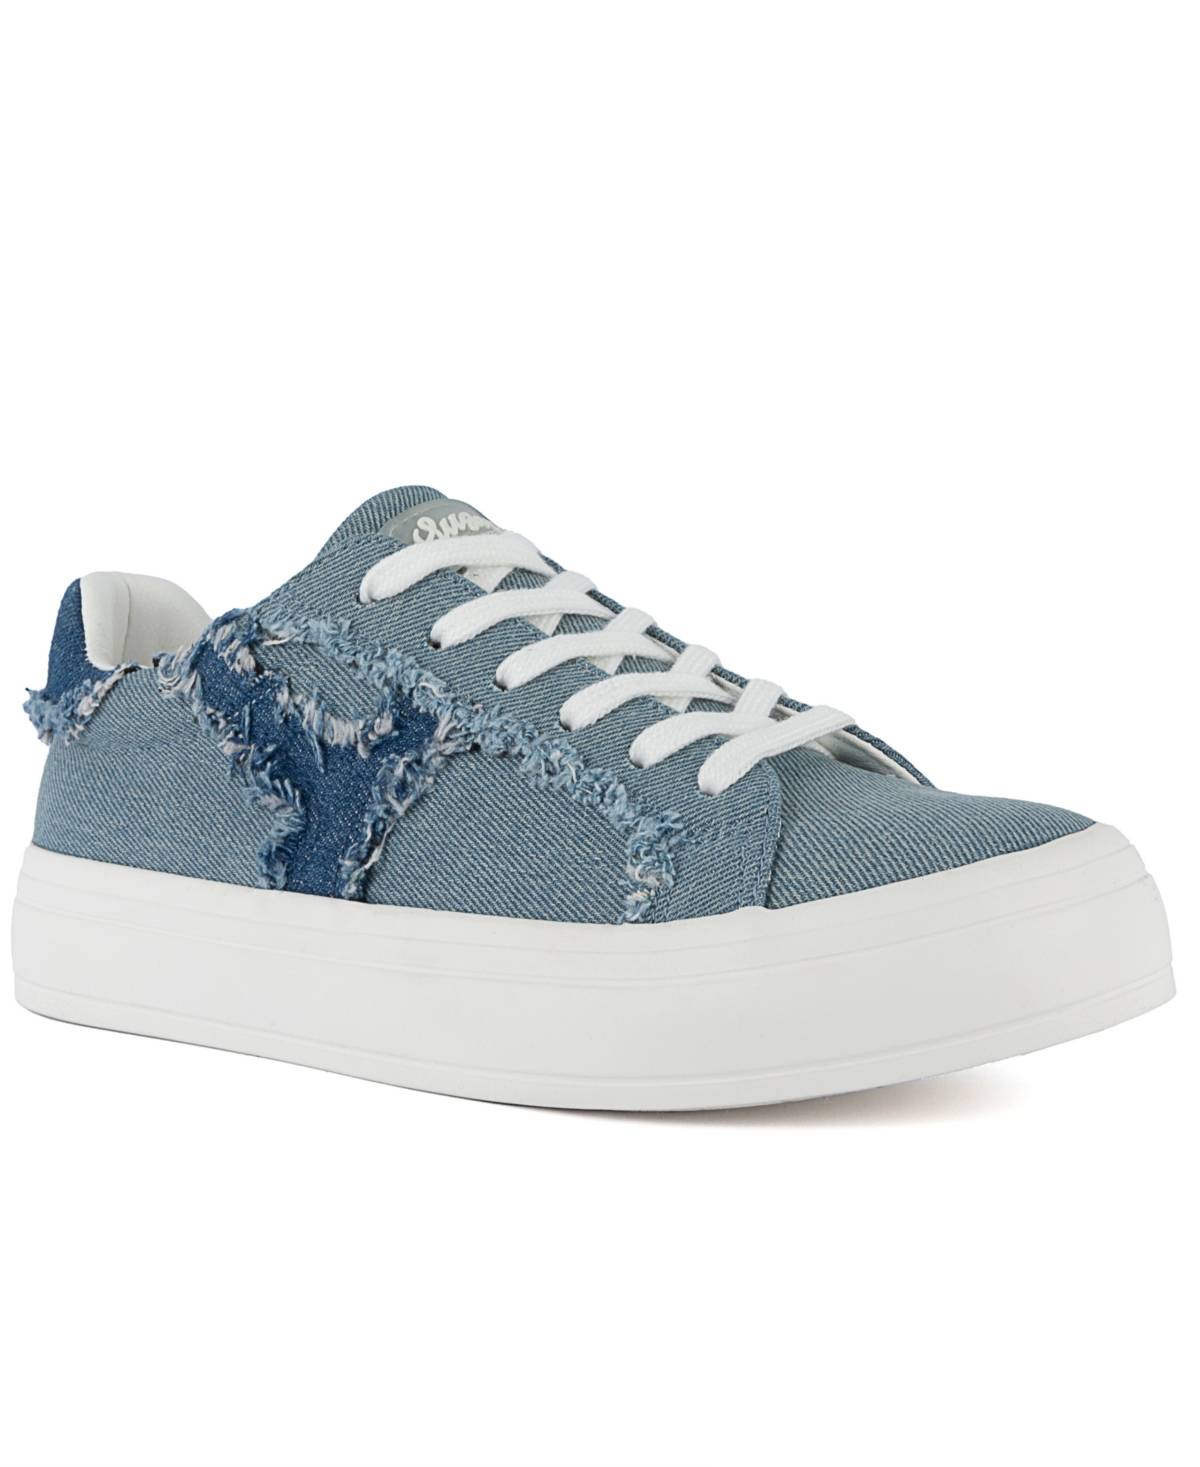 Women's Stallion 2 Lace-Up Sneakers - Blue